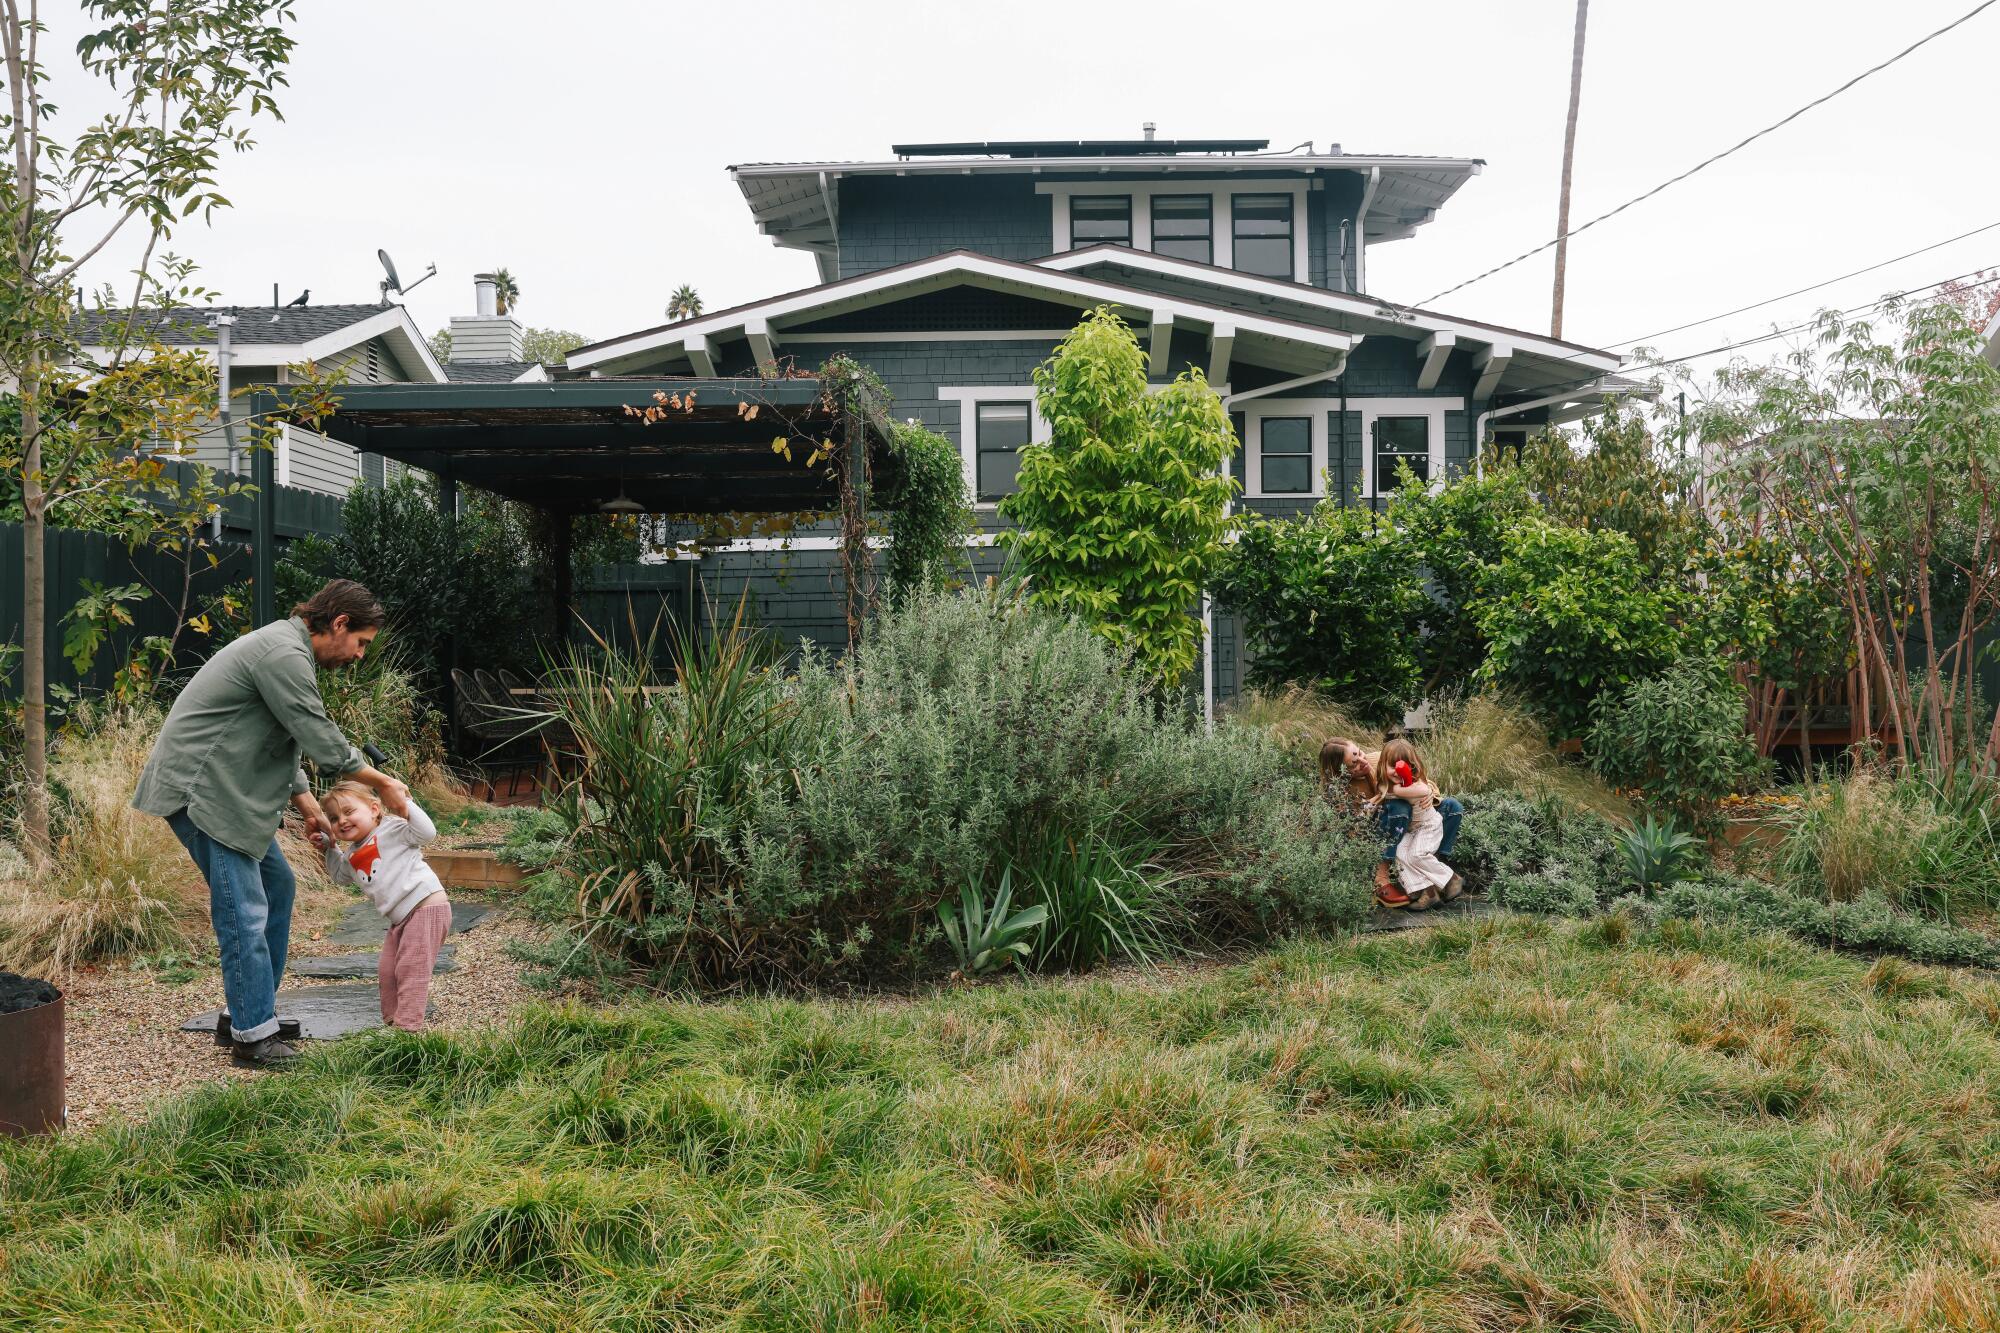 A mother and father and their two young daughters play in the backyard of their Craftsman-style house.